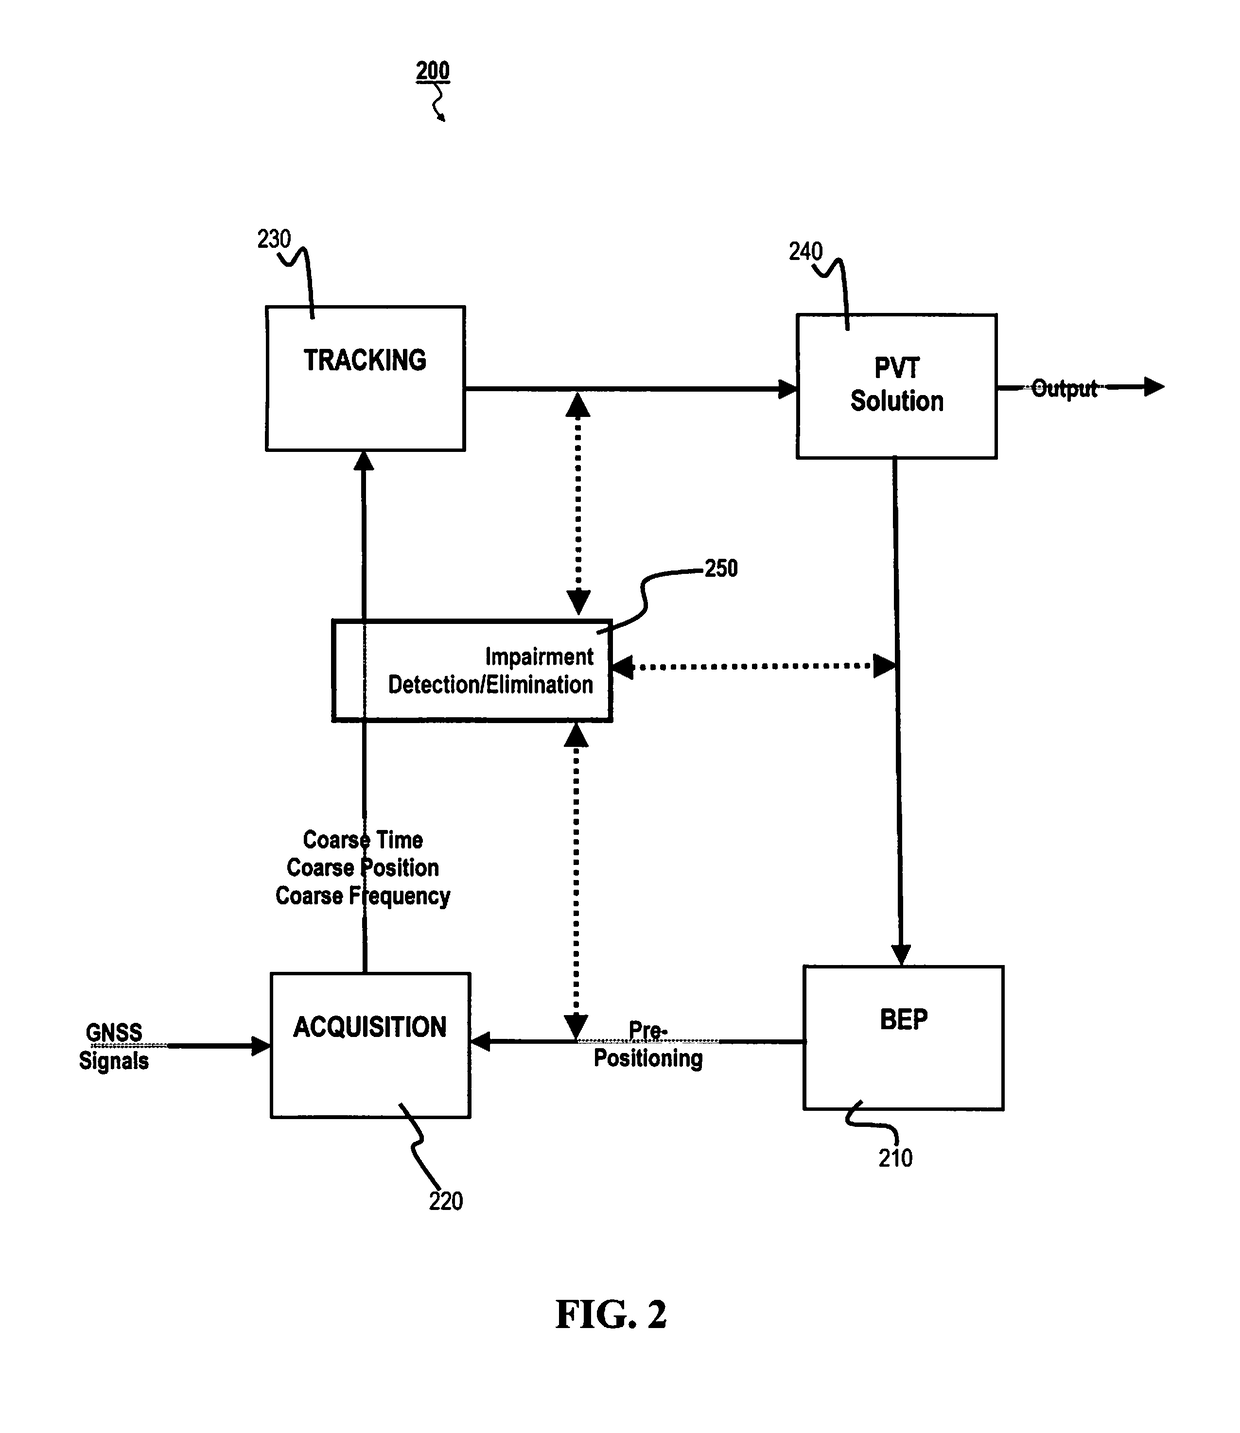 Method for efficiently detecting impairments in a multi-constellation gnss receiver